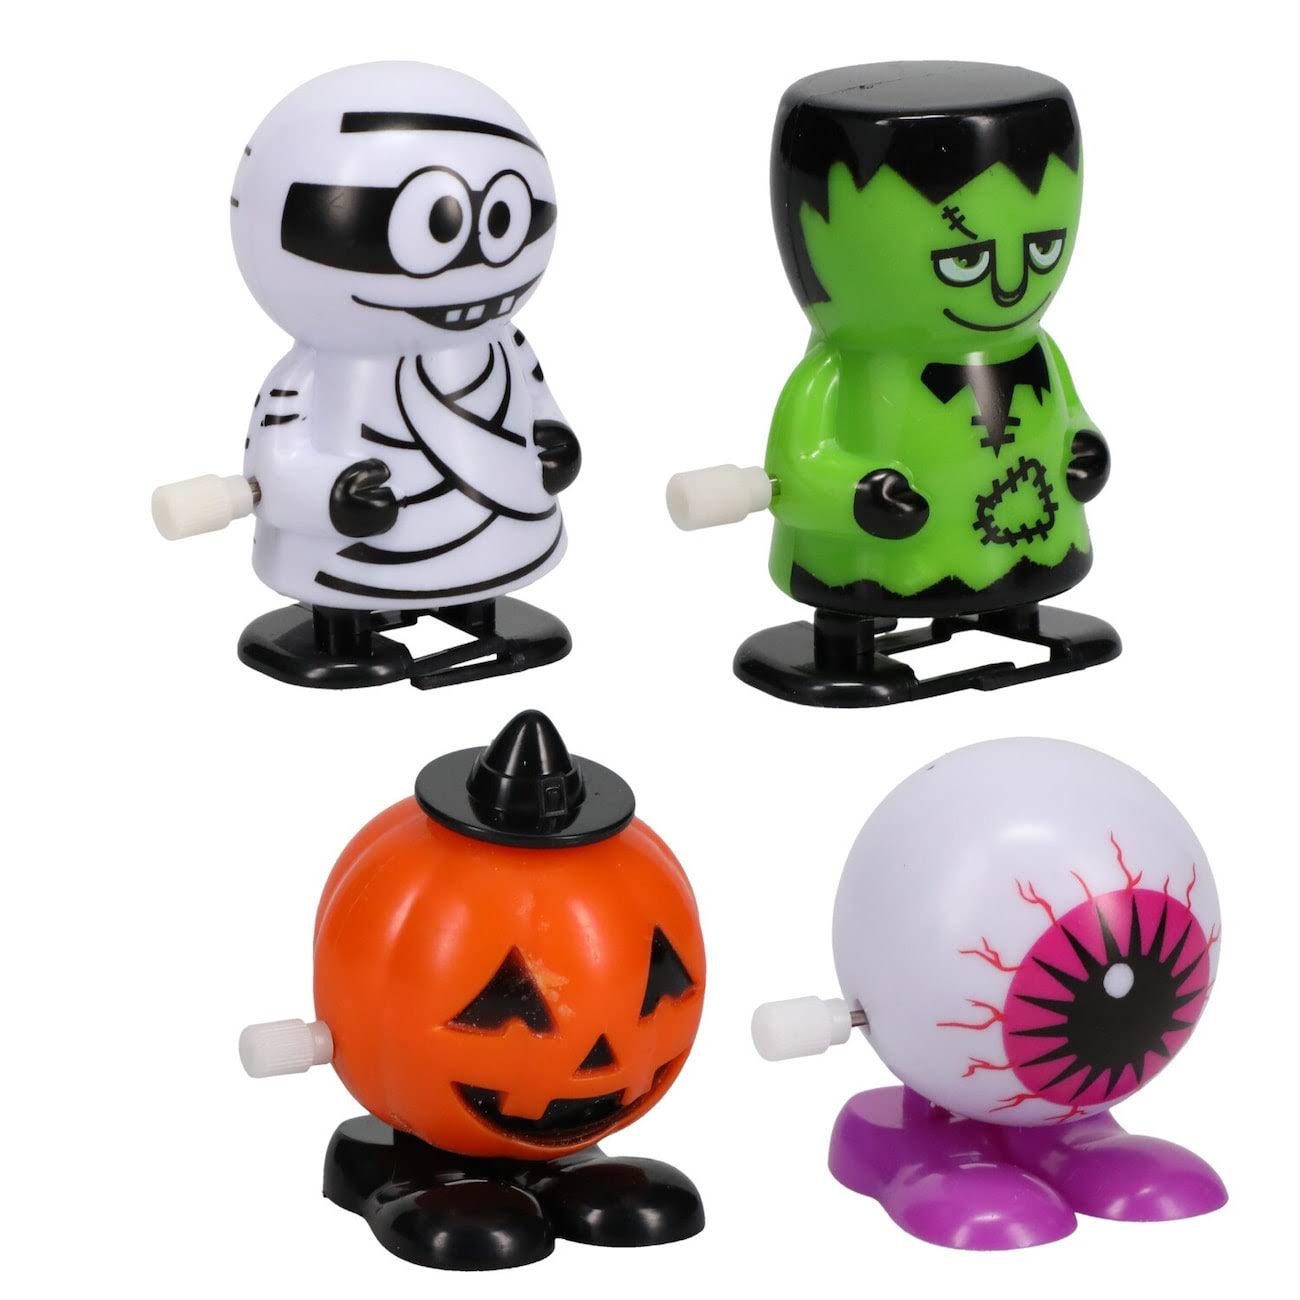 48 Plastic Halloween-Themed Wind Up Hopping Toys, 3.875 x 5.5 x 1.5" at Dollar Tree